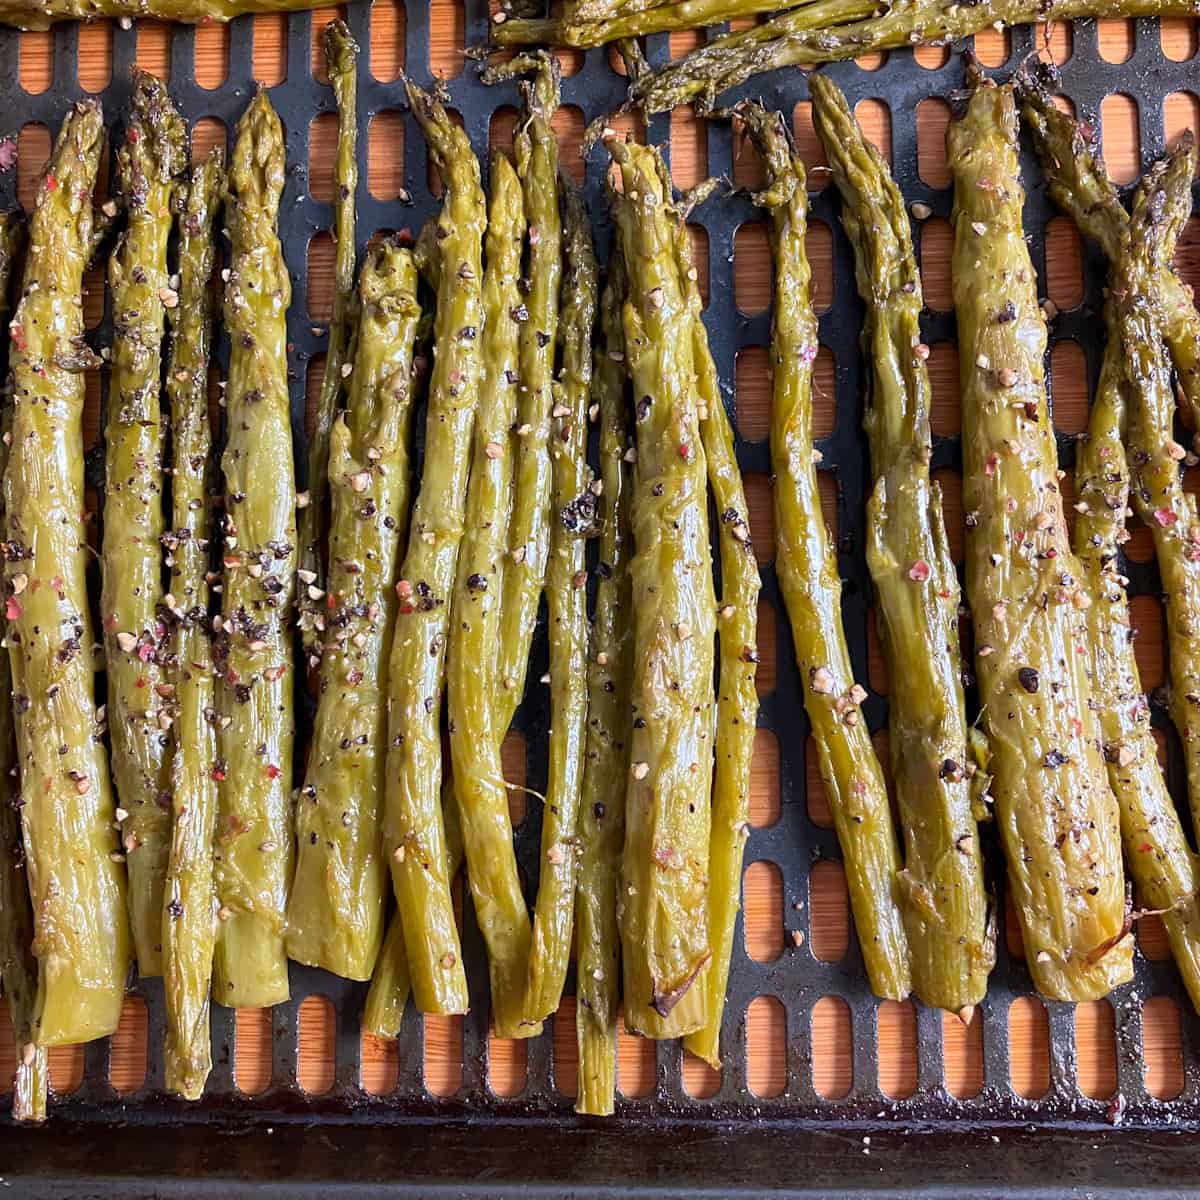 how to cook canned asparagus